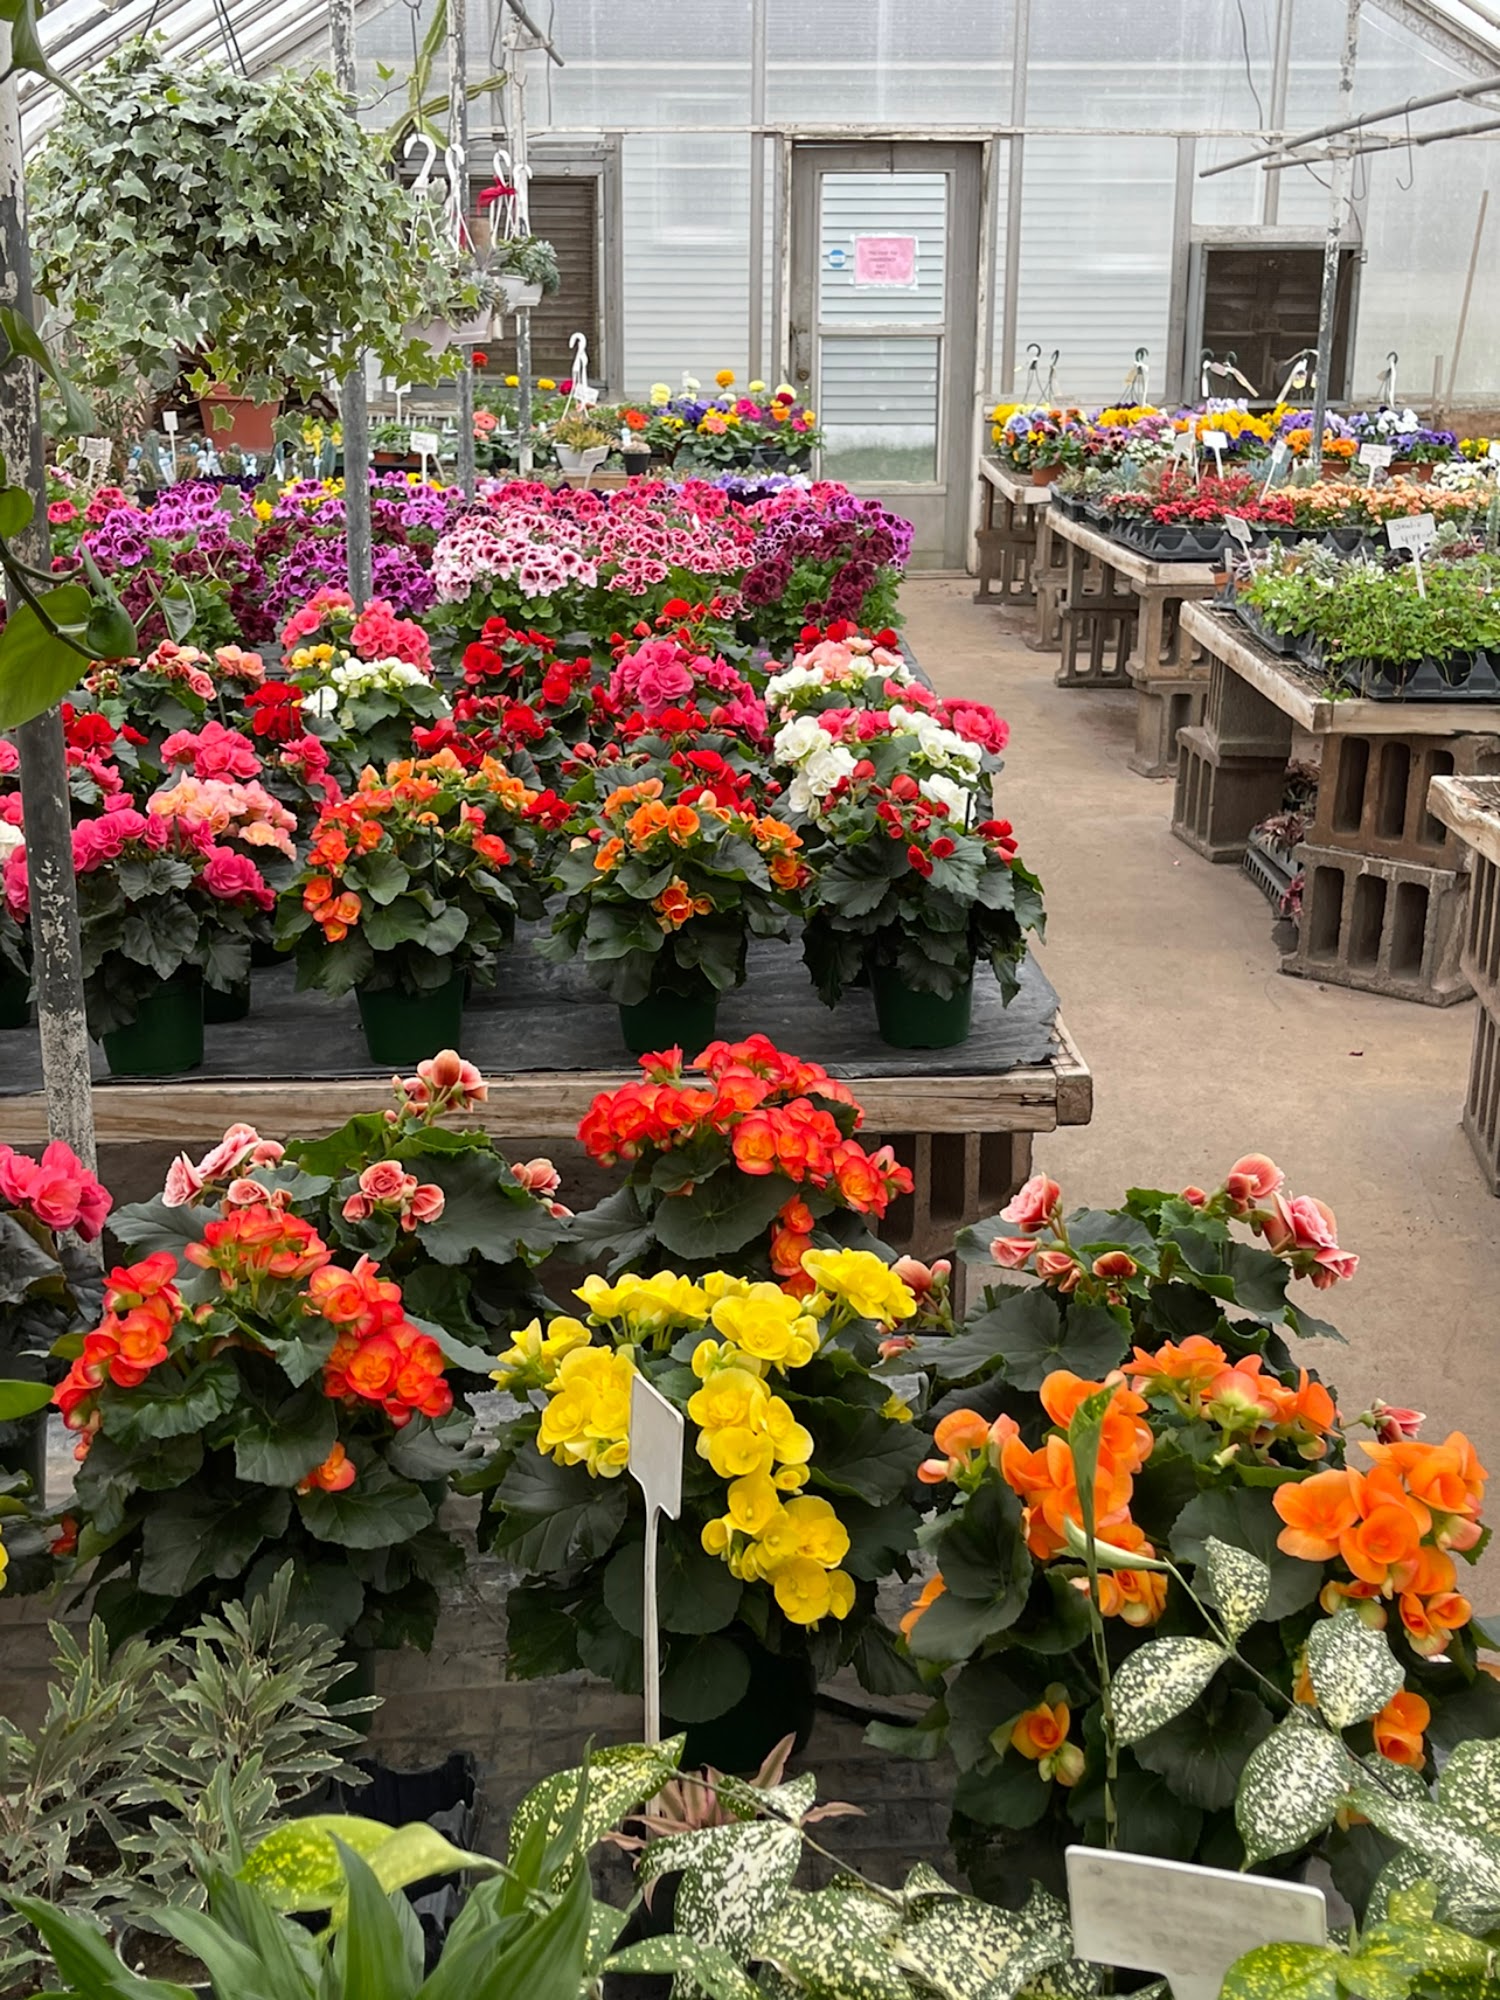 Red Hill Greenhouses & Florist 1006 Main St, Red Hill Pennsylvania 18076